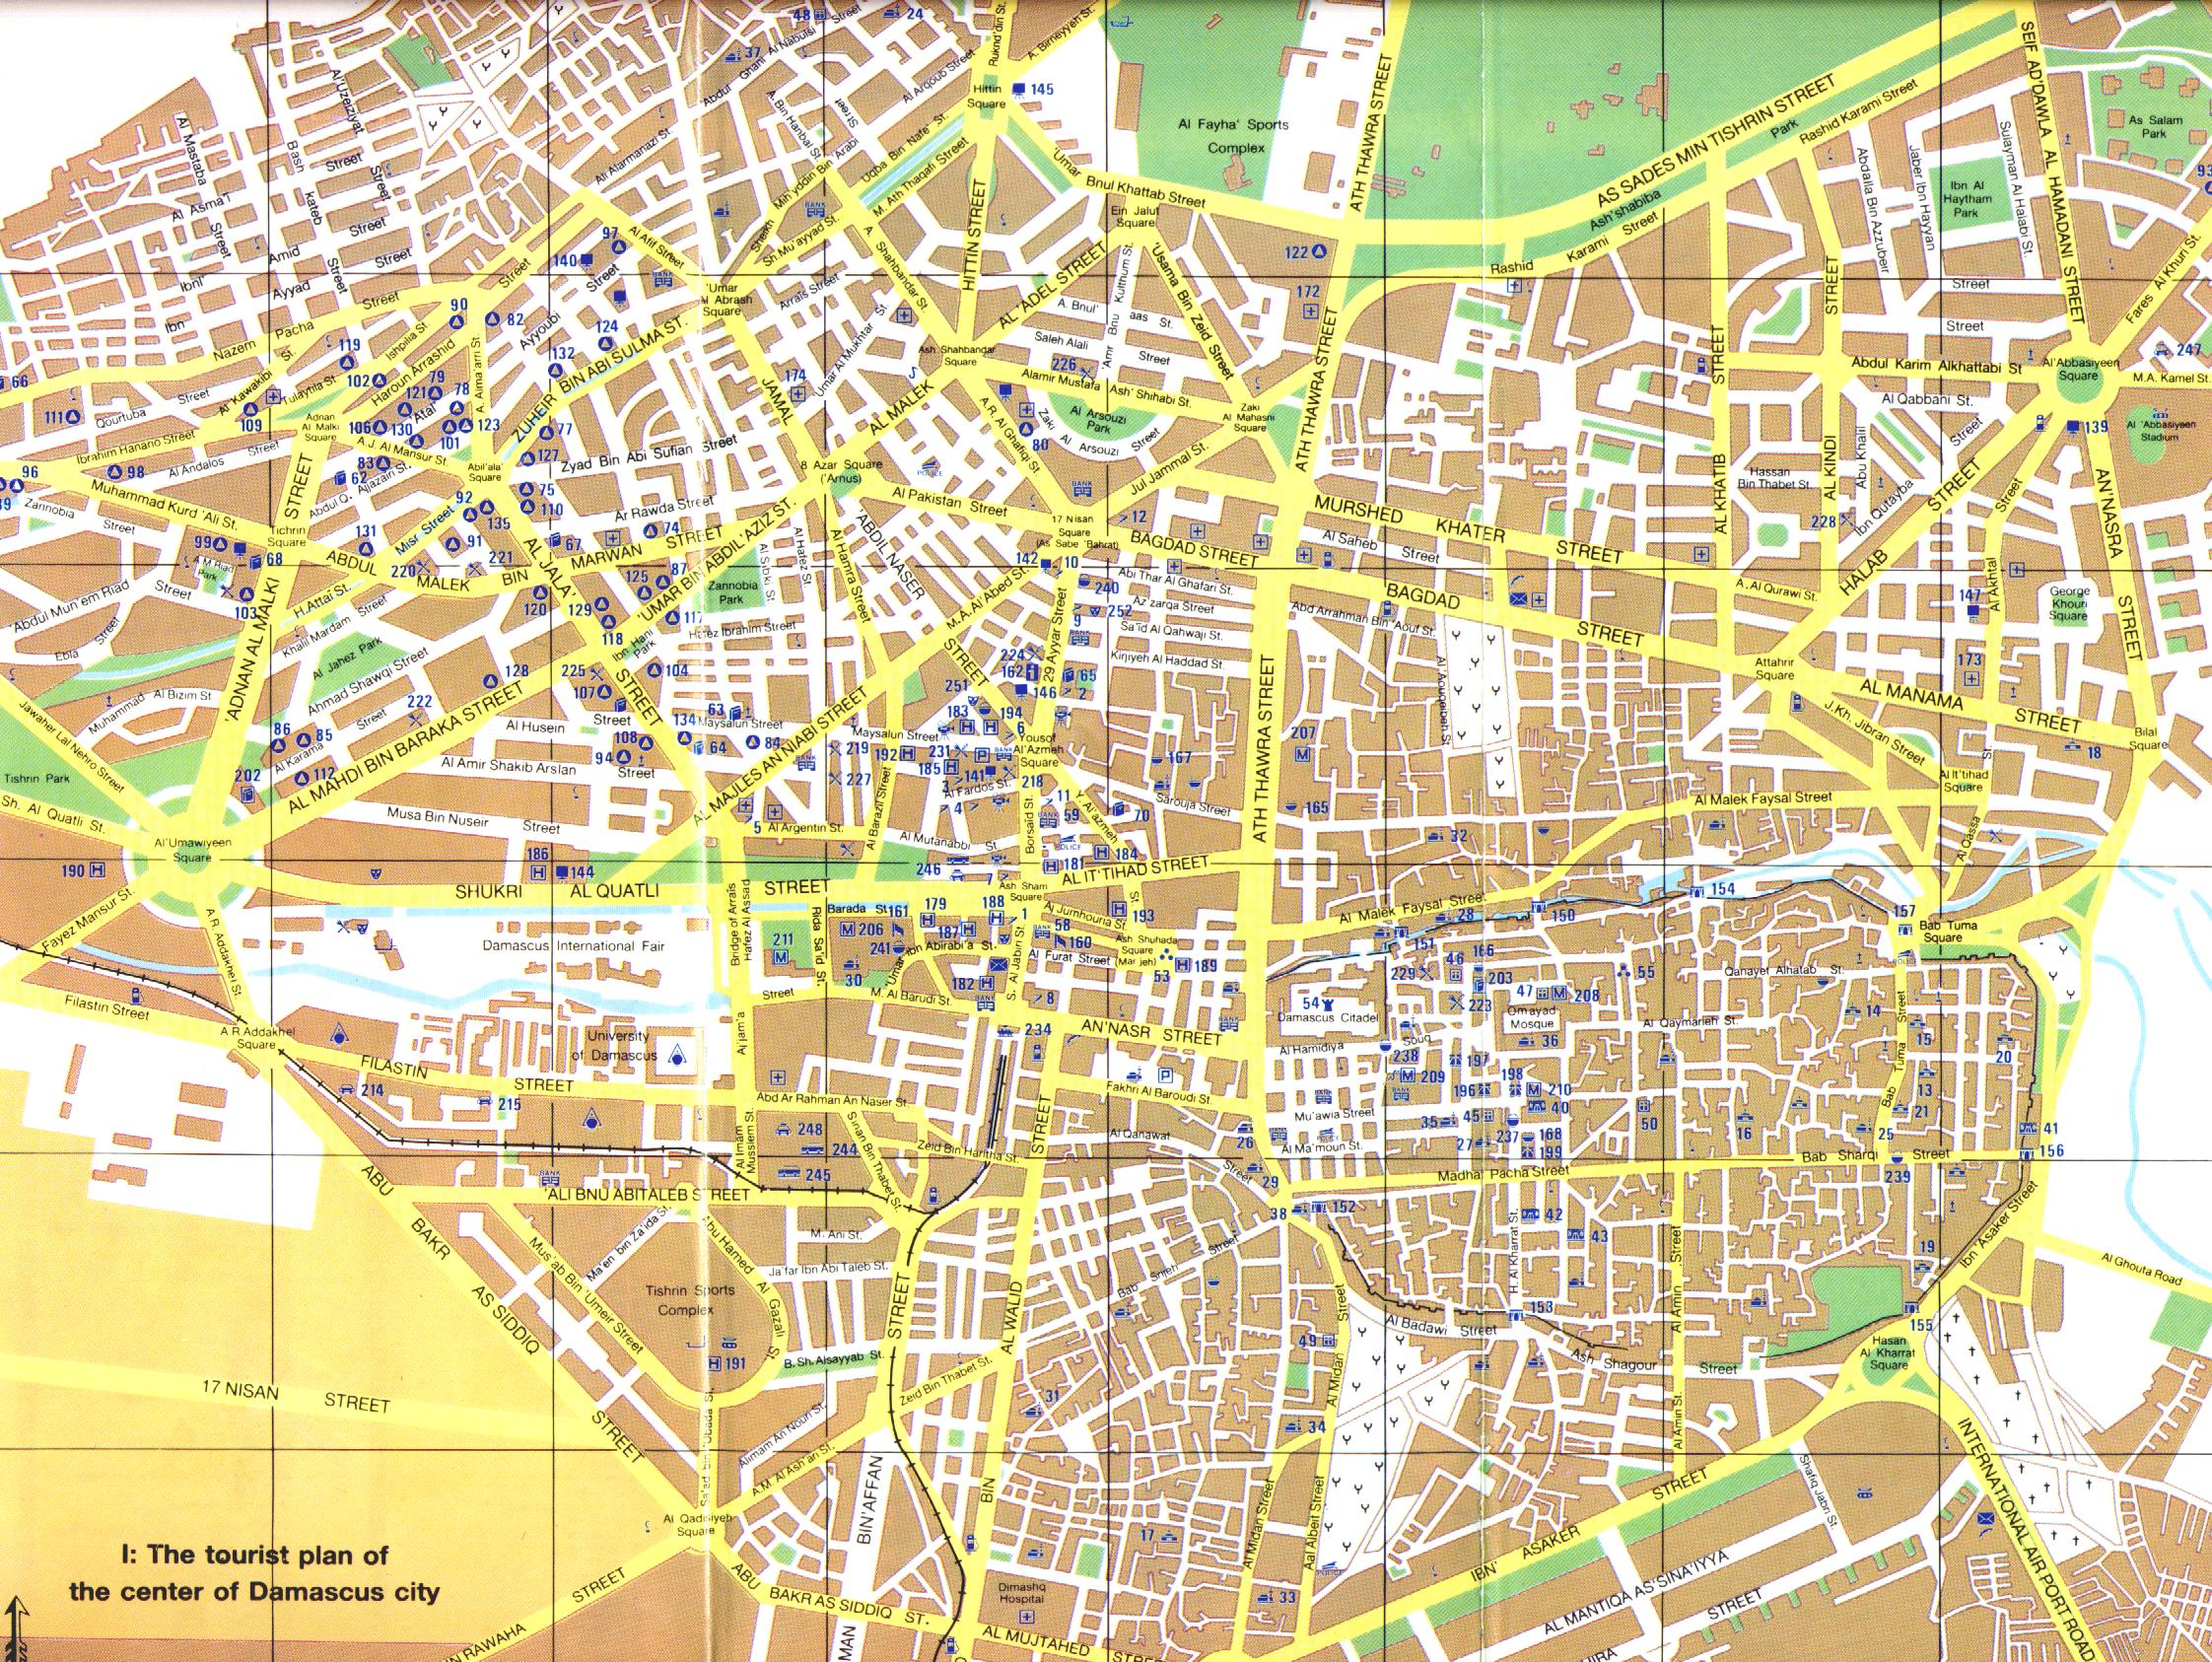 Map of Damascus